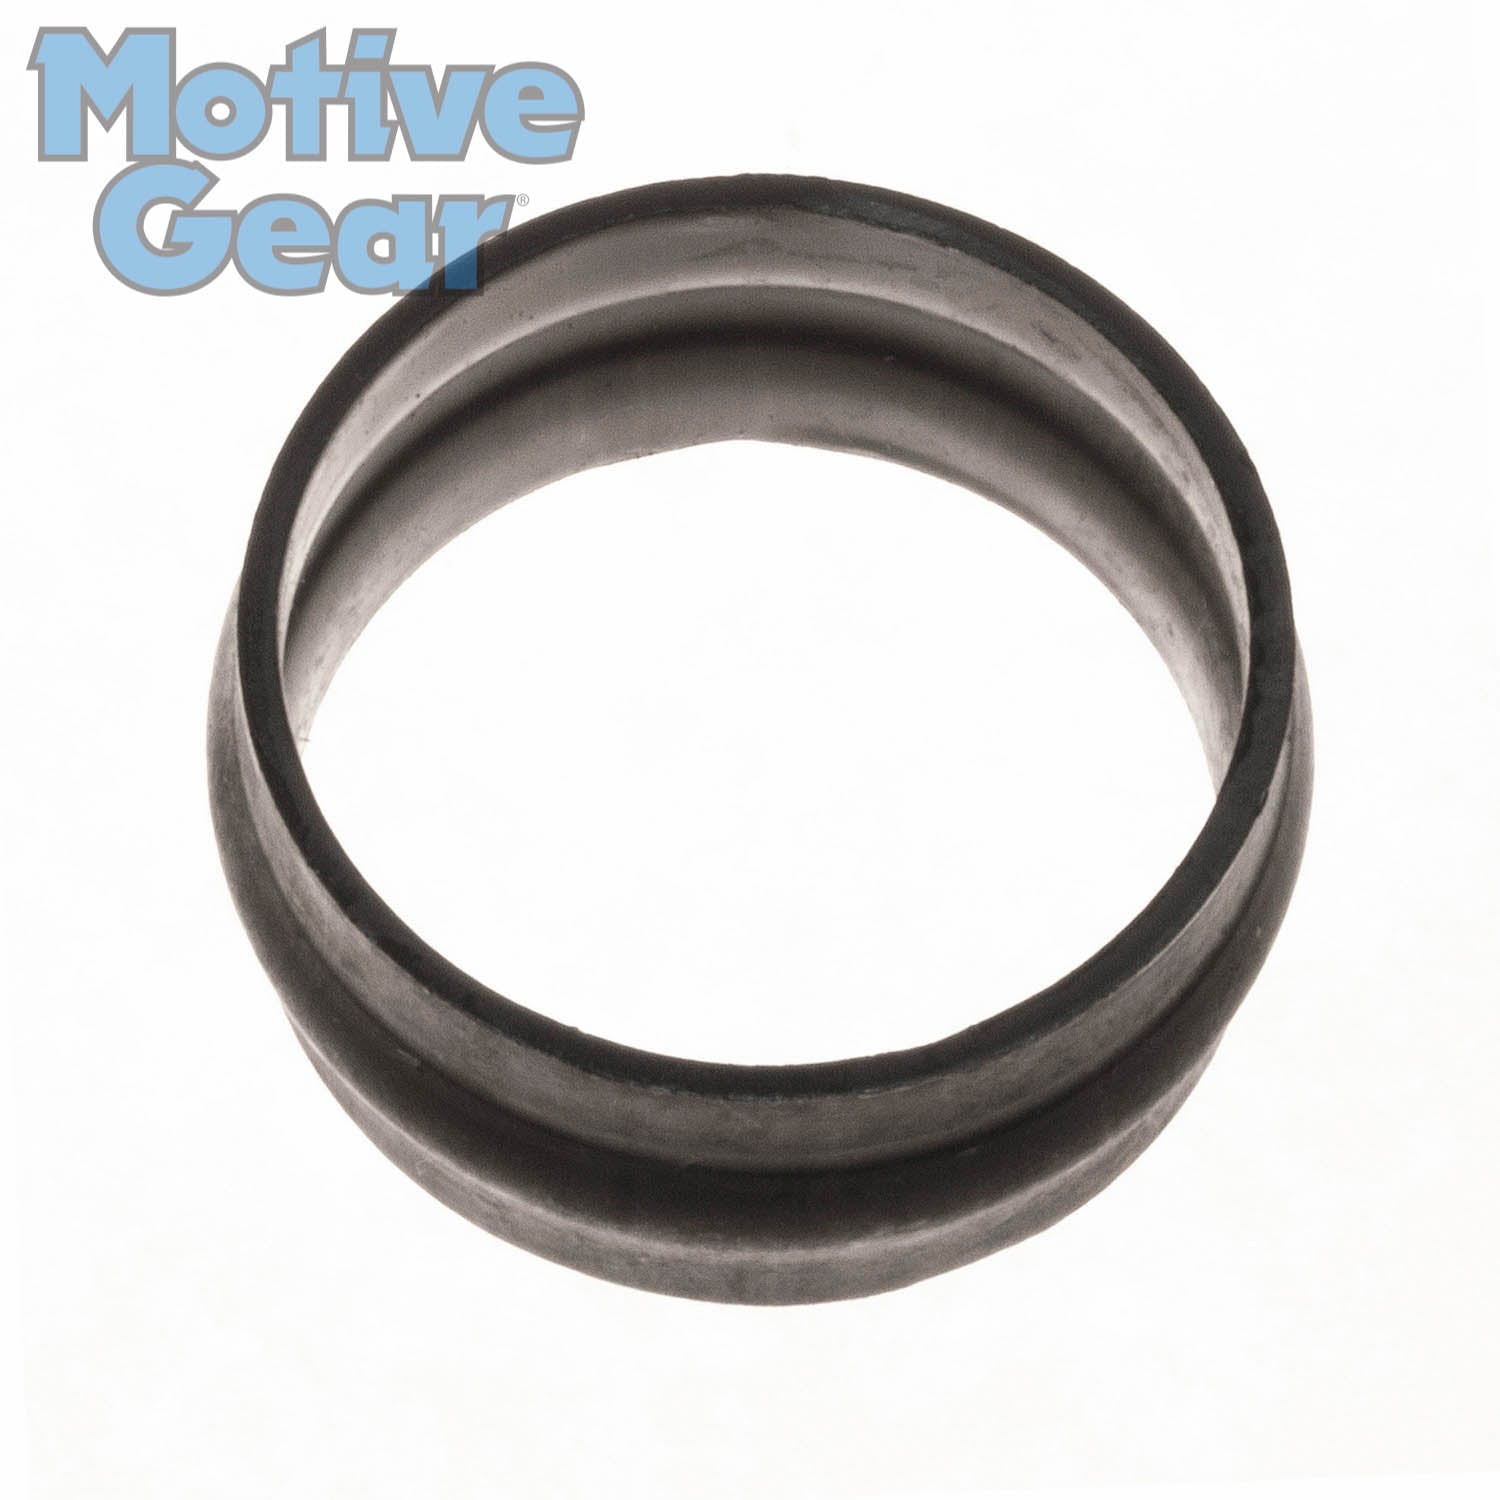 Motive Gear 26008741 Differential Crush Sleeve